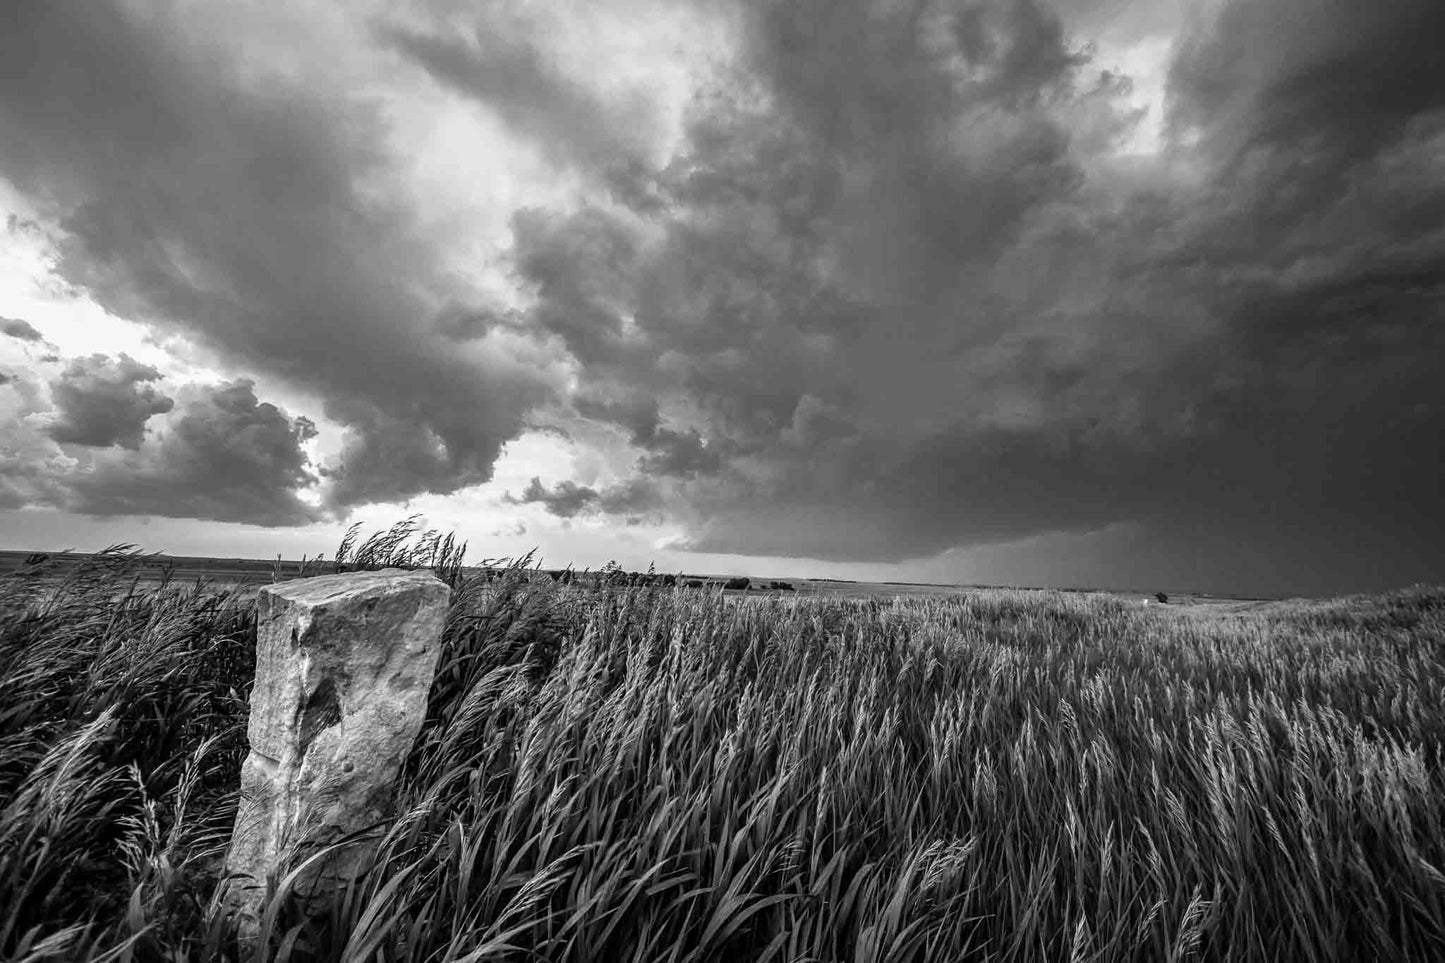 Black and white Great Plains photography print of an old limestone marker in waving prairie grass as a storm brews on the horizon on a stormy spring day in Kansas by Sean Ramsey of Southern Plains Photography.